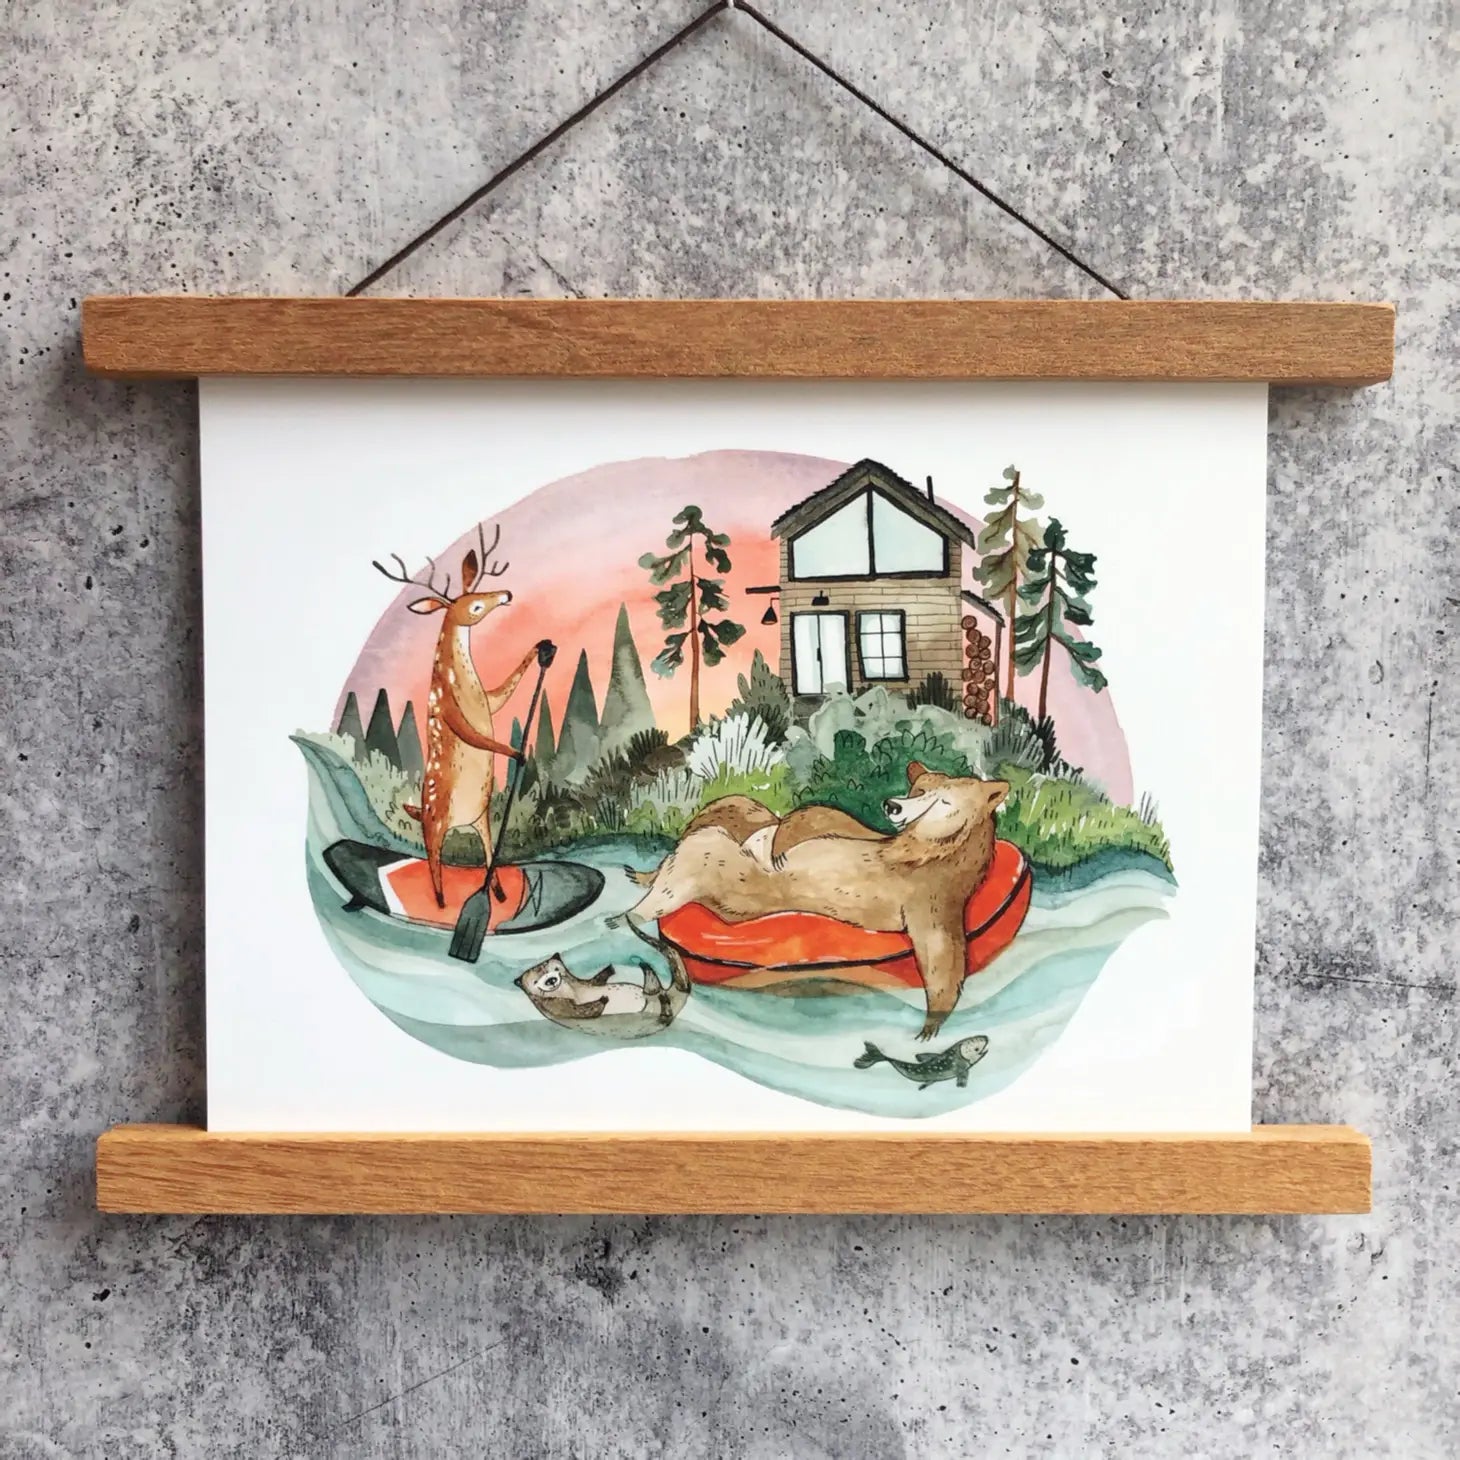 River Float - 8x10 Art Print - Created by Little Pine Artistry Canyon & Cove